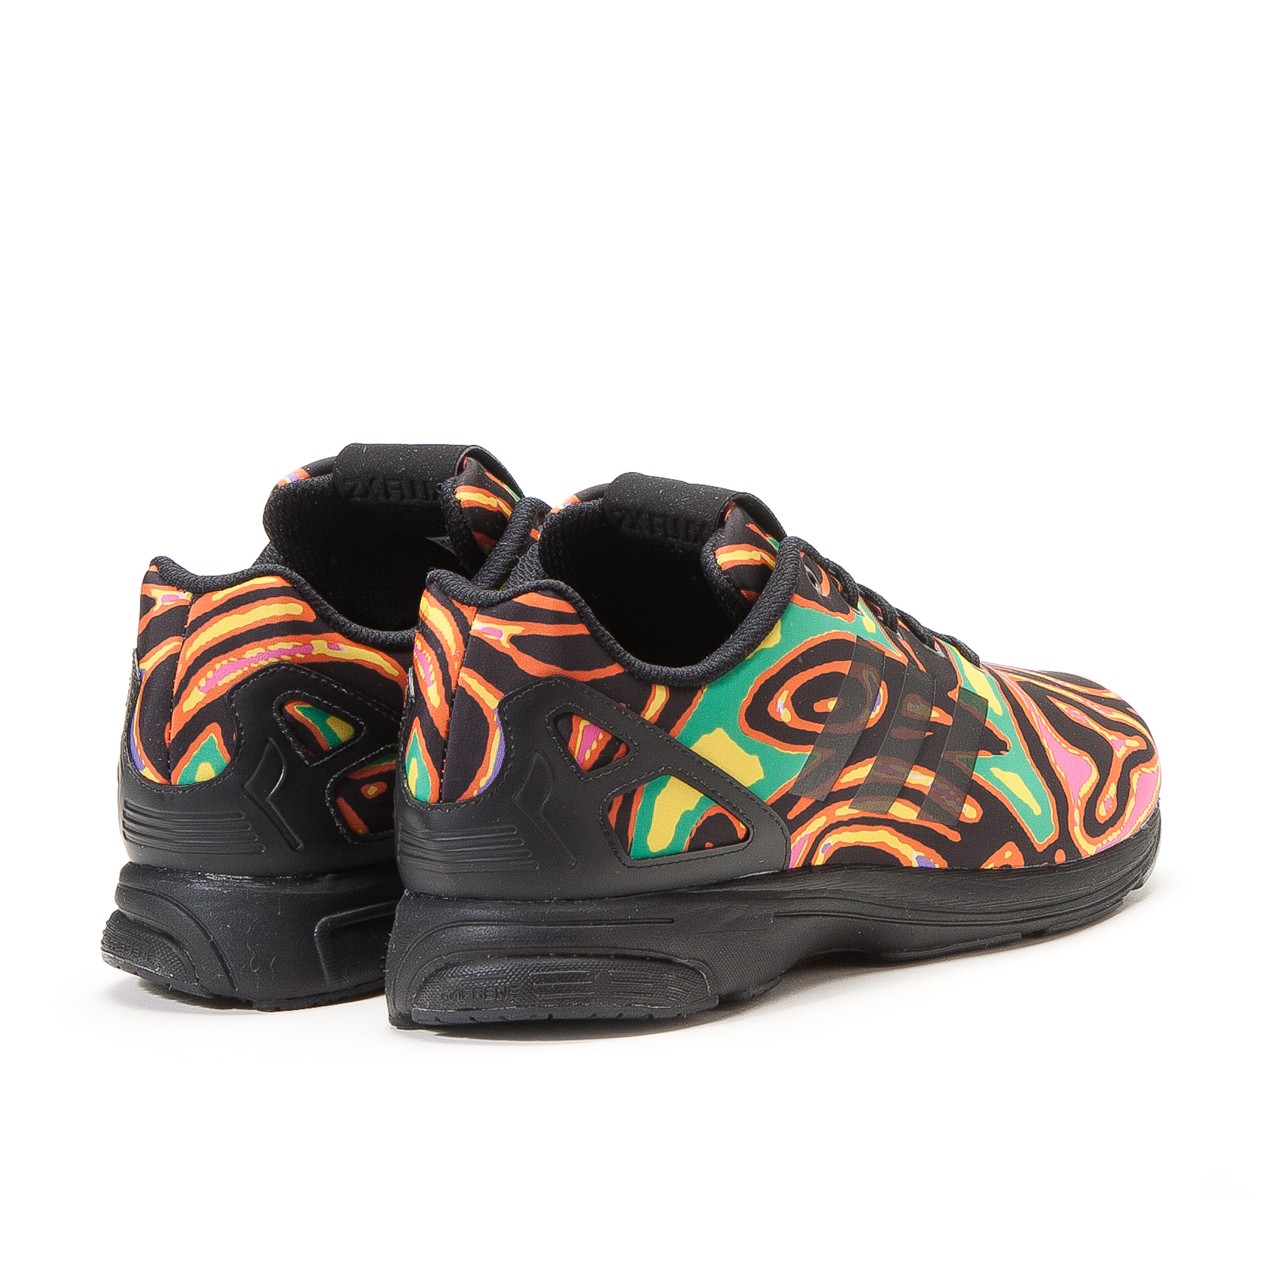 The adidas ZX Flux Gets Psychedelic On This Jeremy Scott Design 